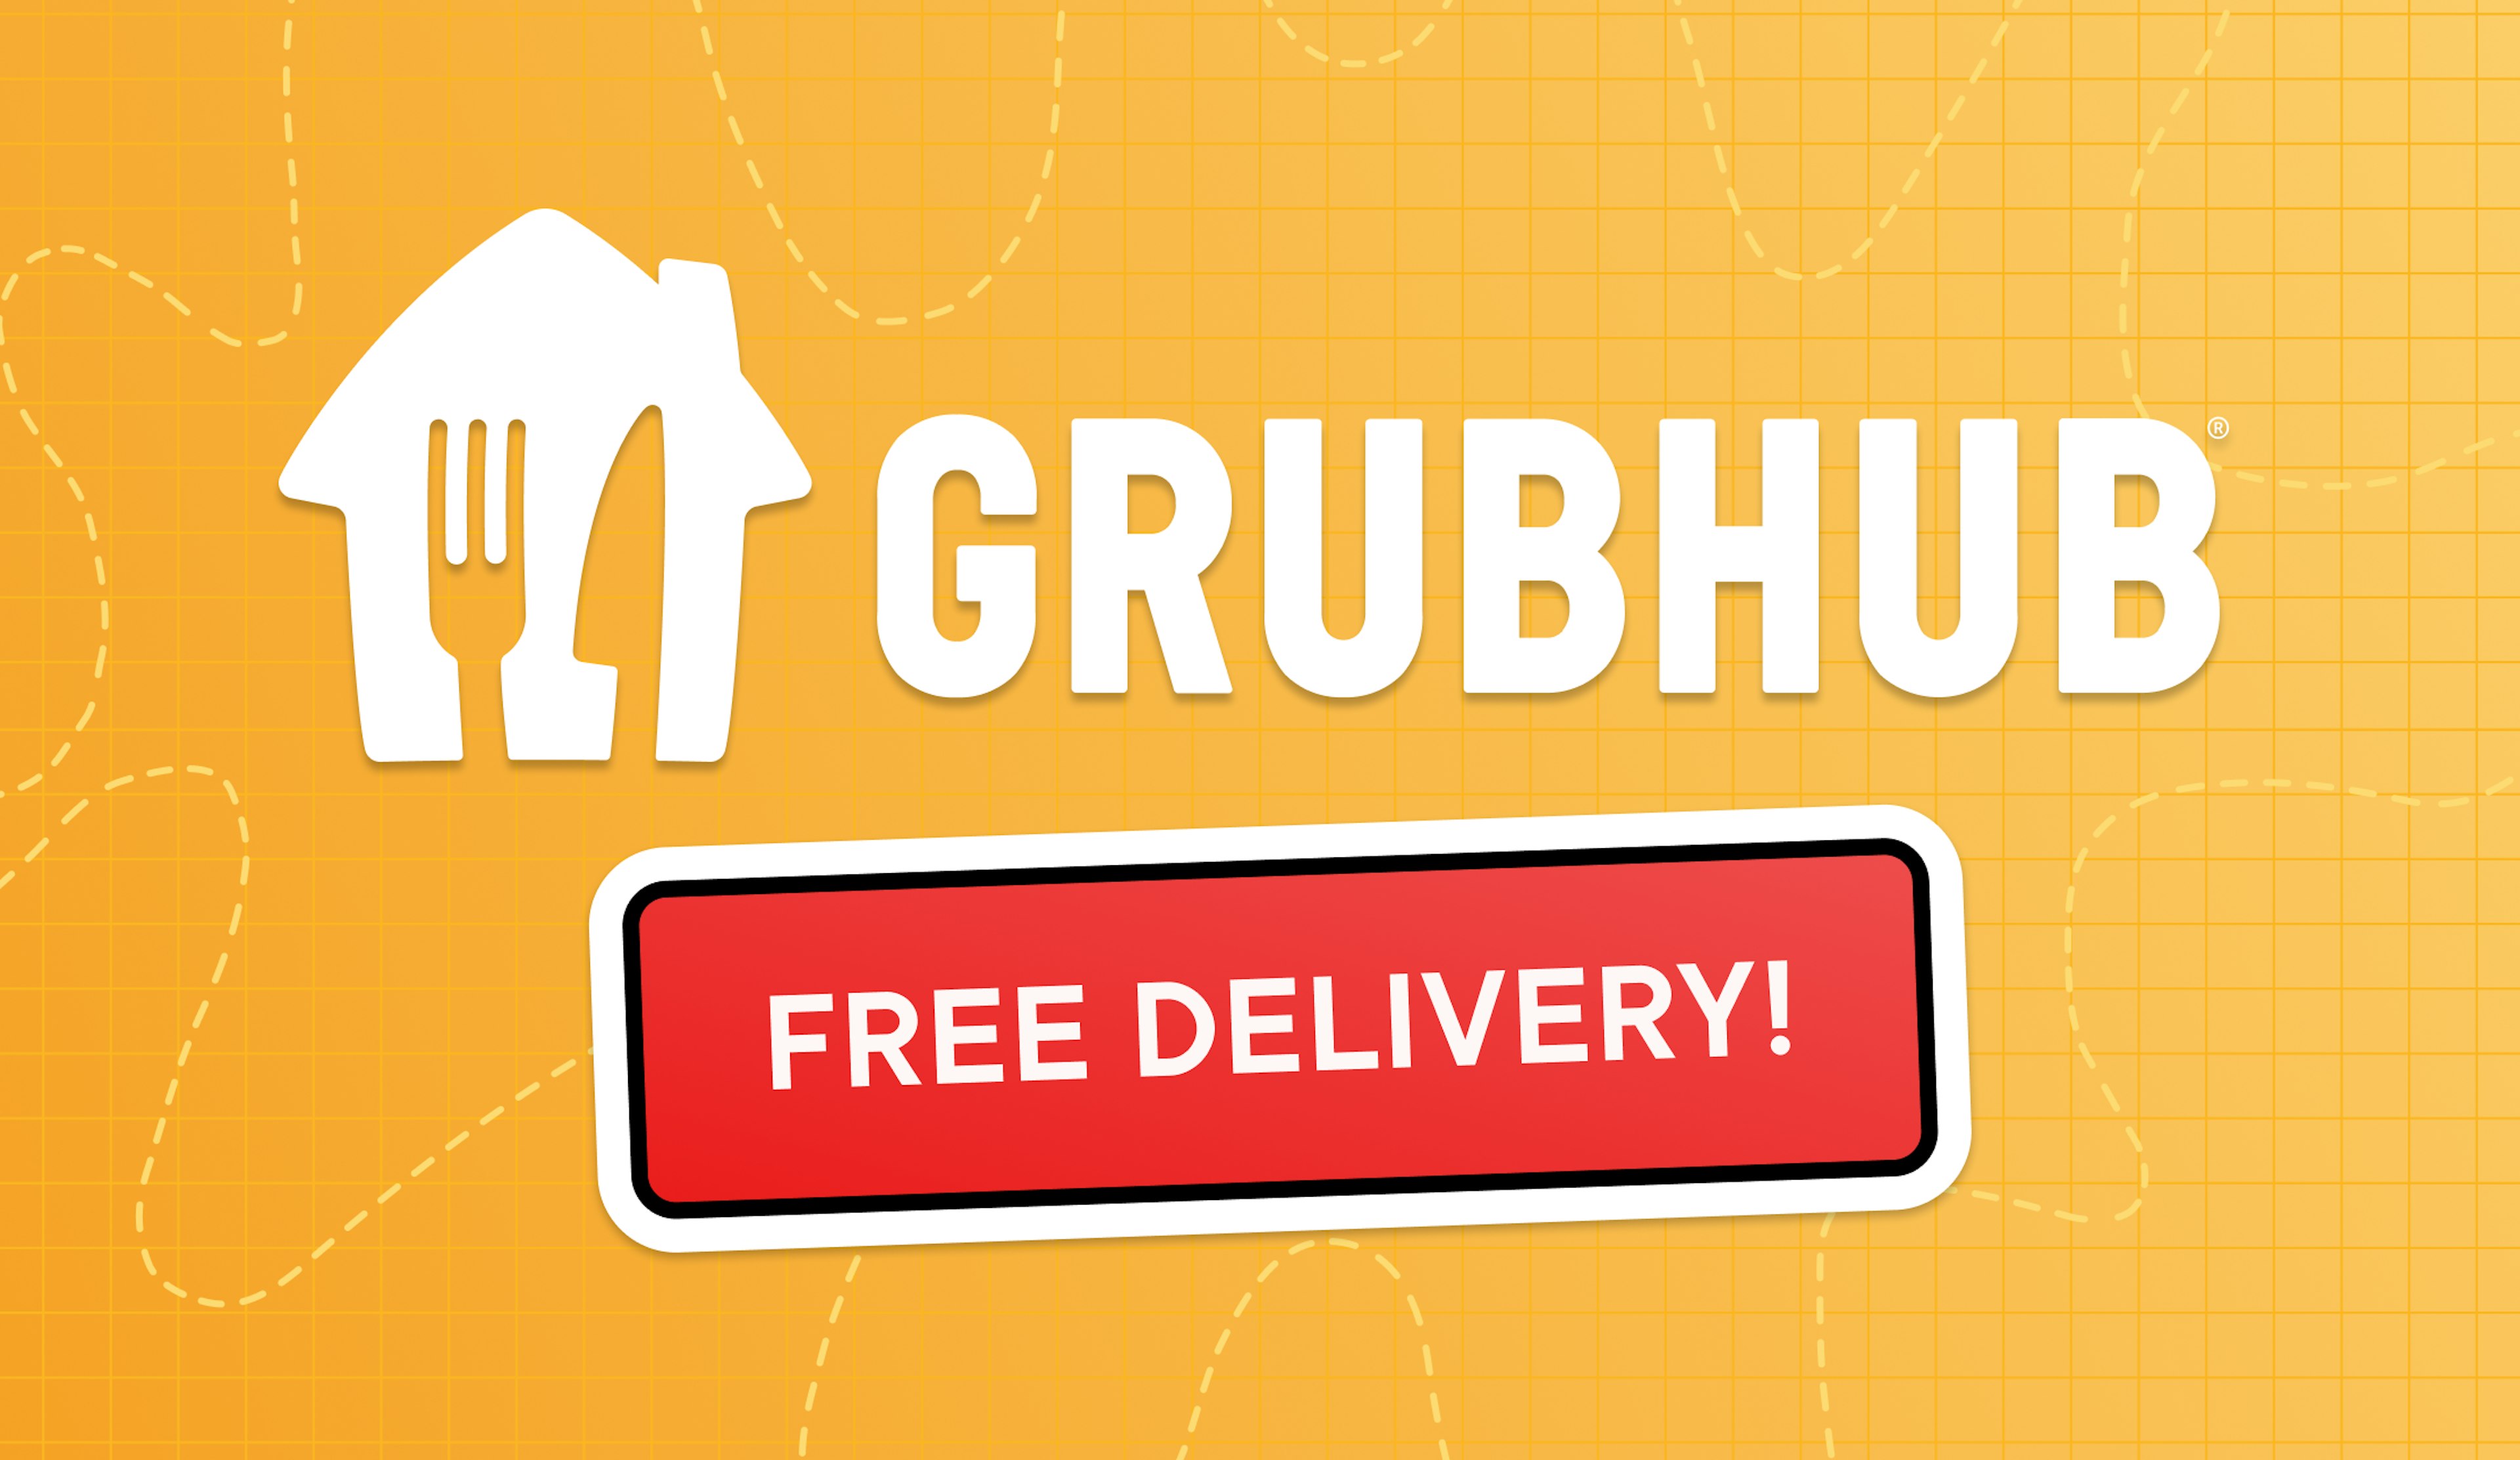 Expired] : Save on Gift Cards for Grubhub, Seamless